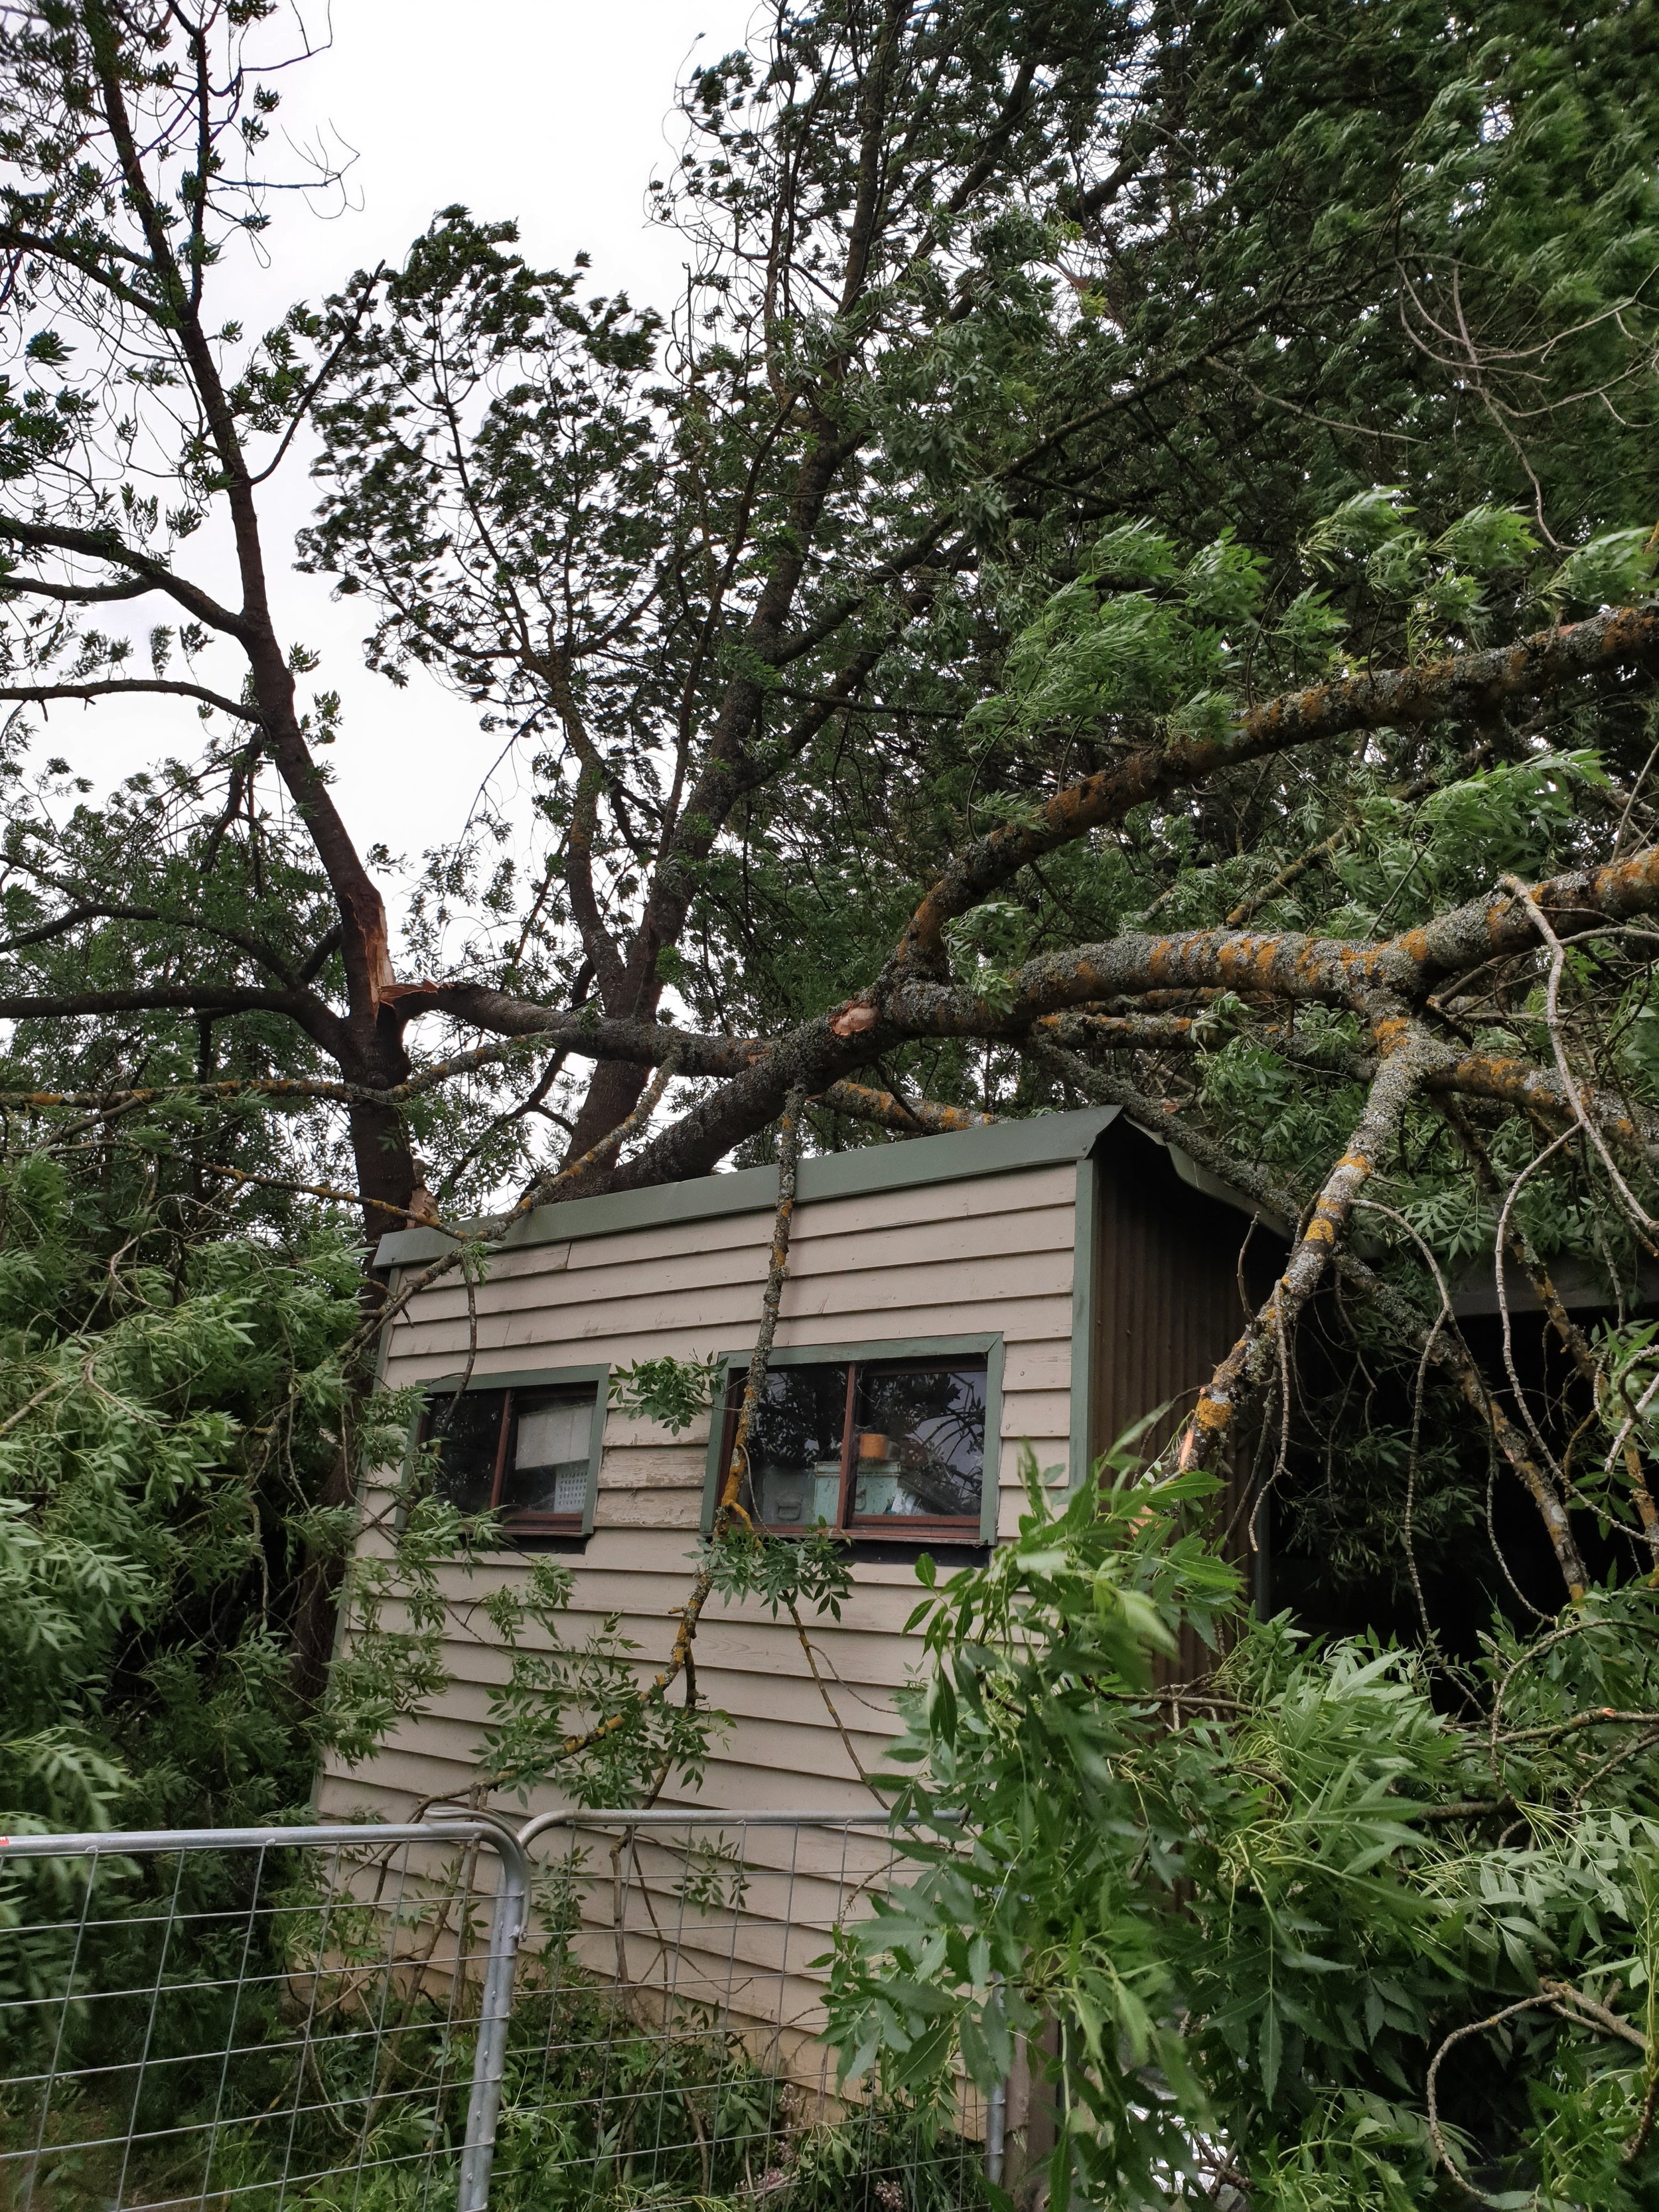 Shed with large tree branches fallen over it